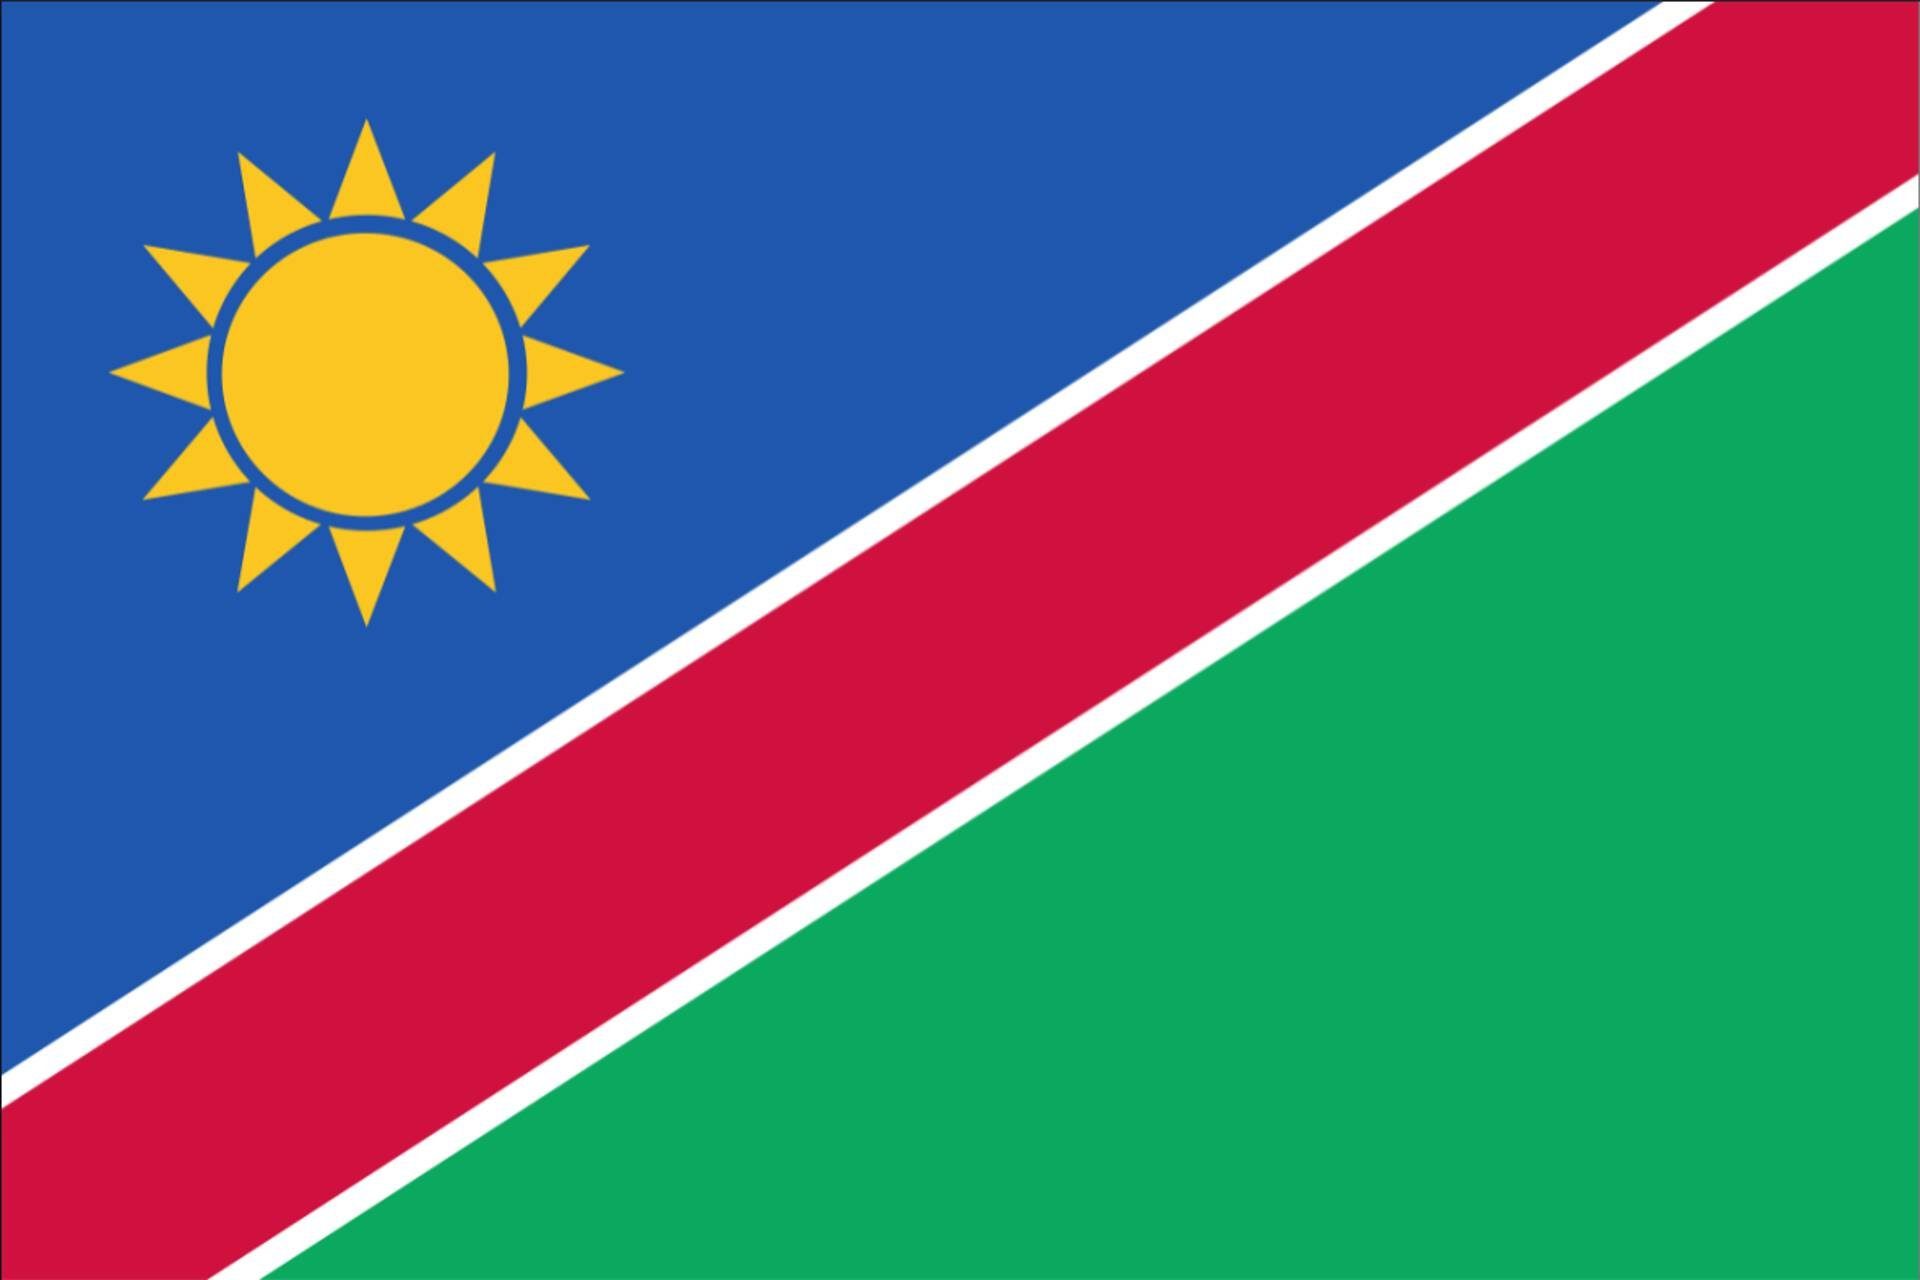 flaggenmeer Flagge Namibia 80 g/m²